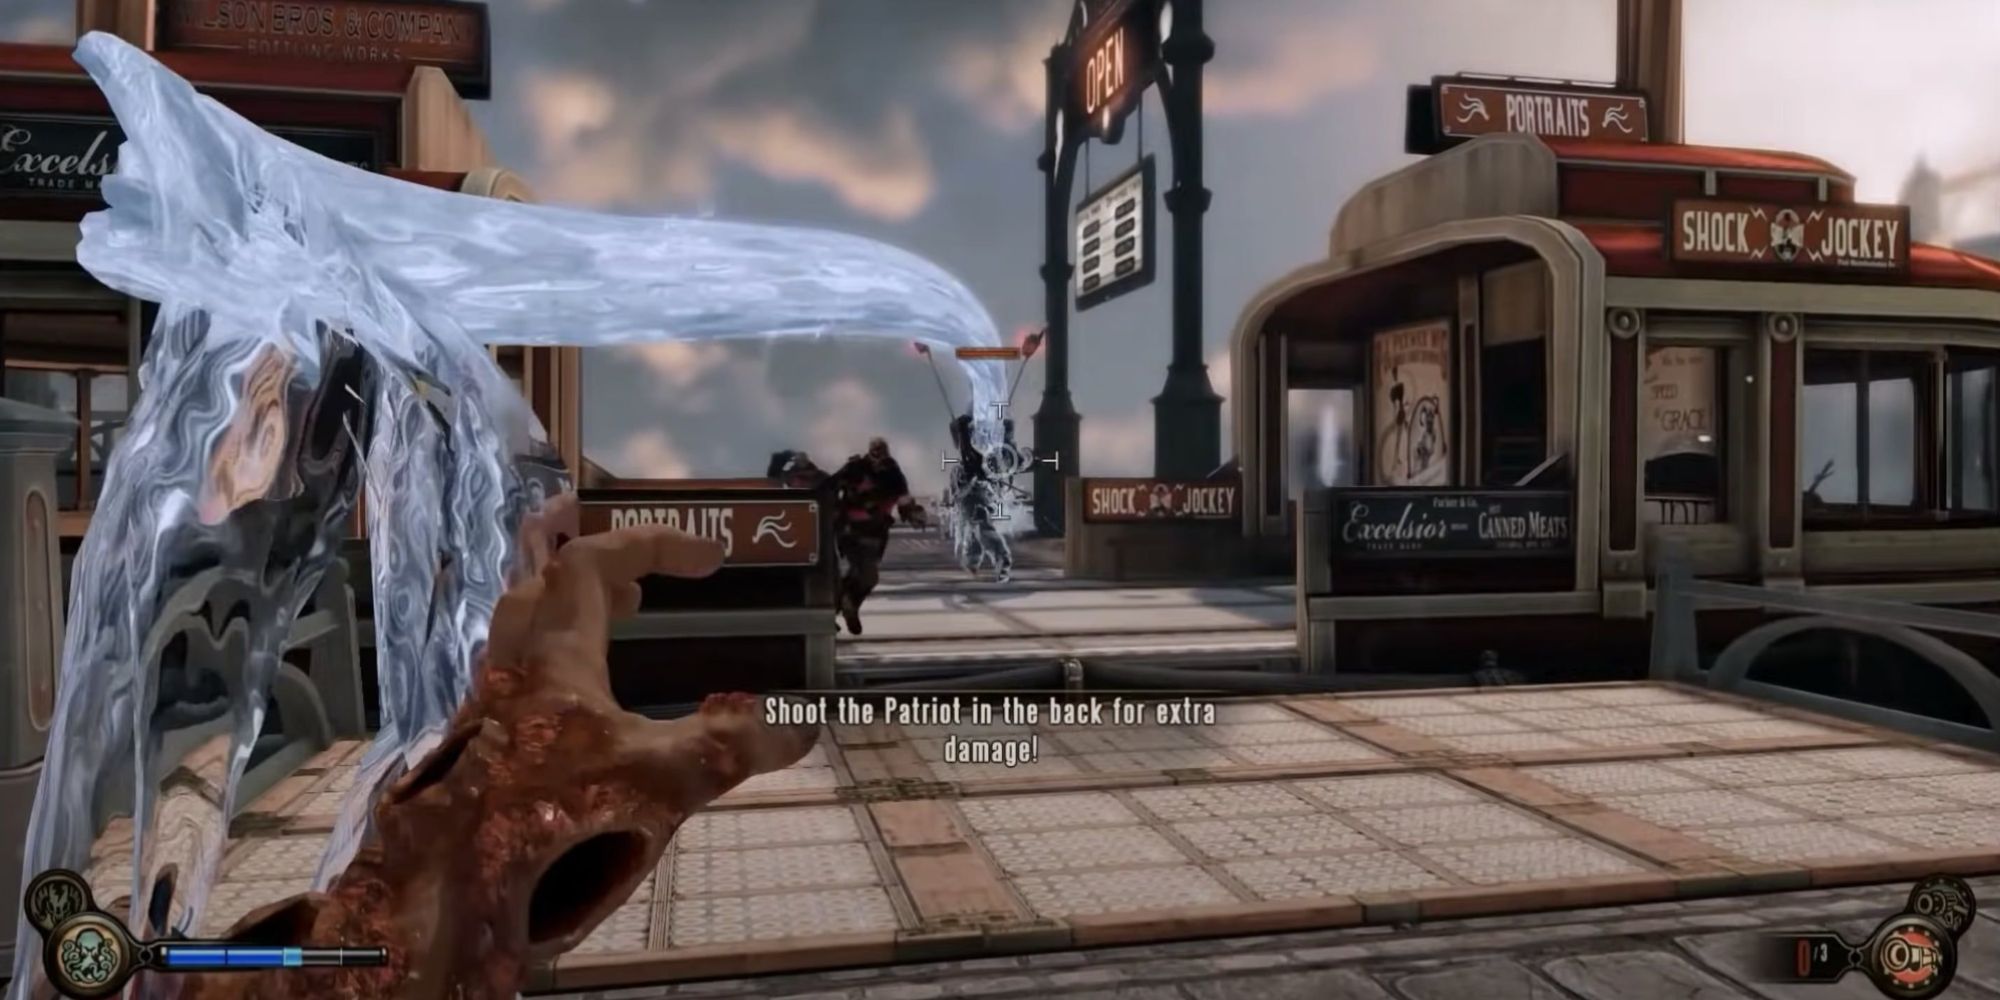 Booker using Undertow, which sends a stream of water to grab an enemy, near a rail station in BioShock Infinite.